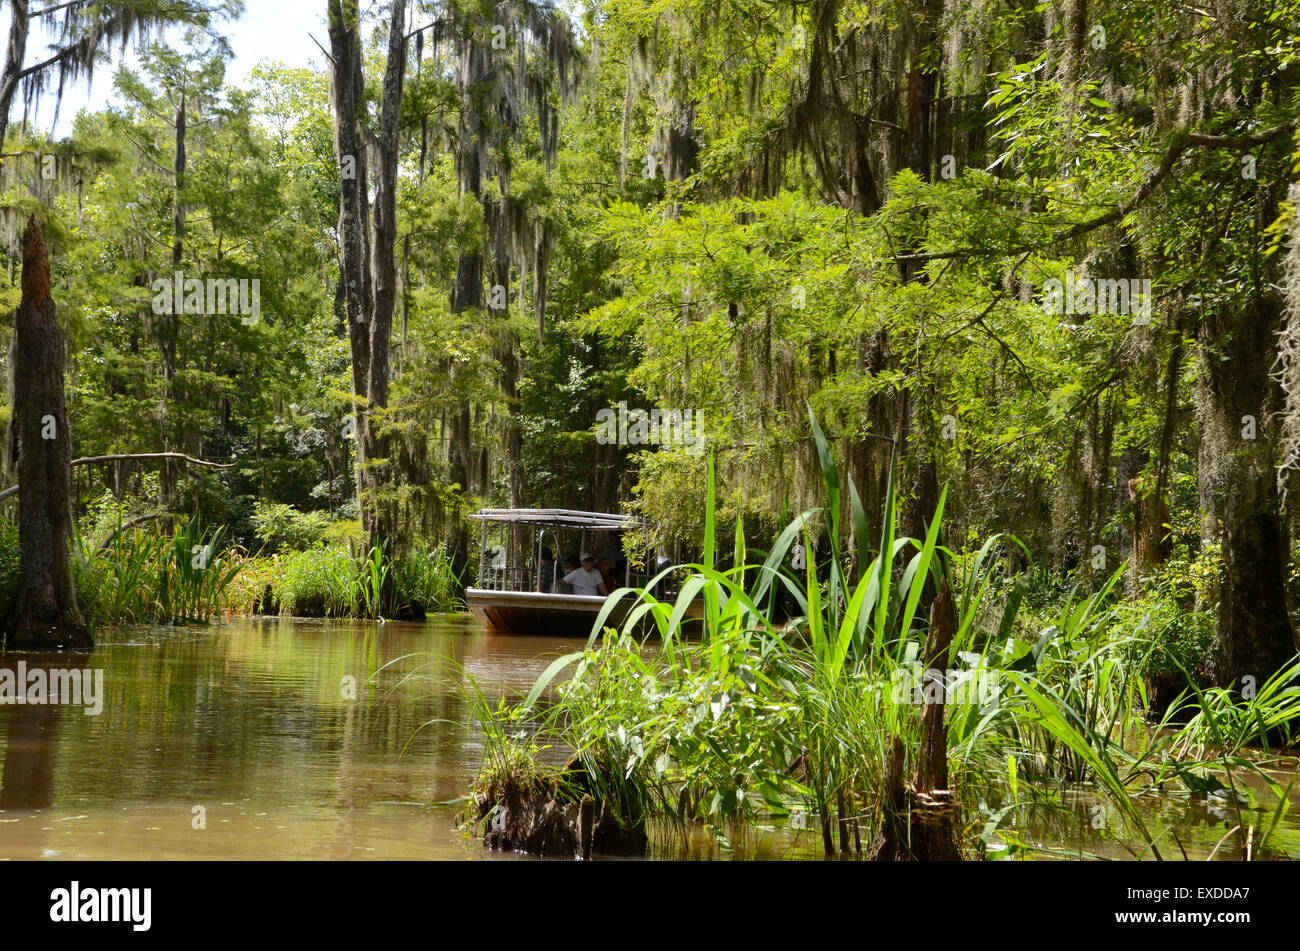 Louisiana Swamp Pearl River bayou new orleans tour in barca Foto Stock